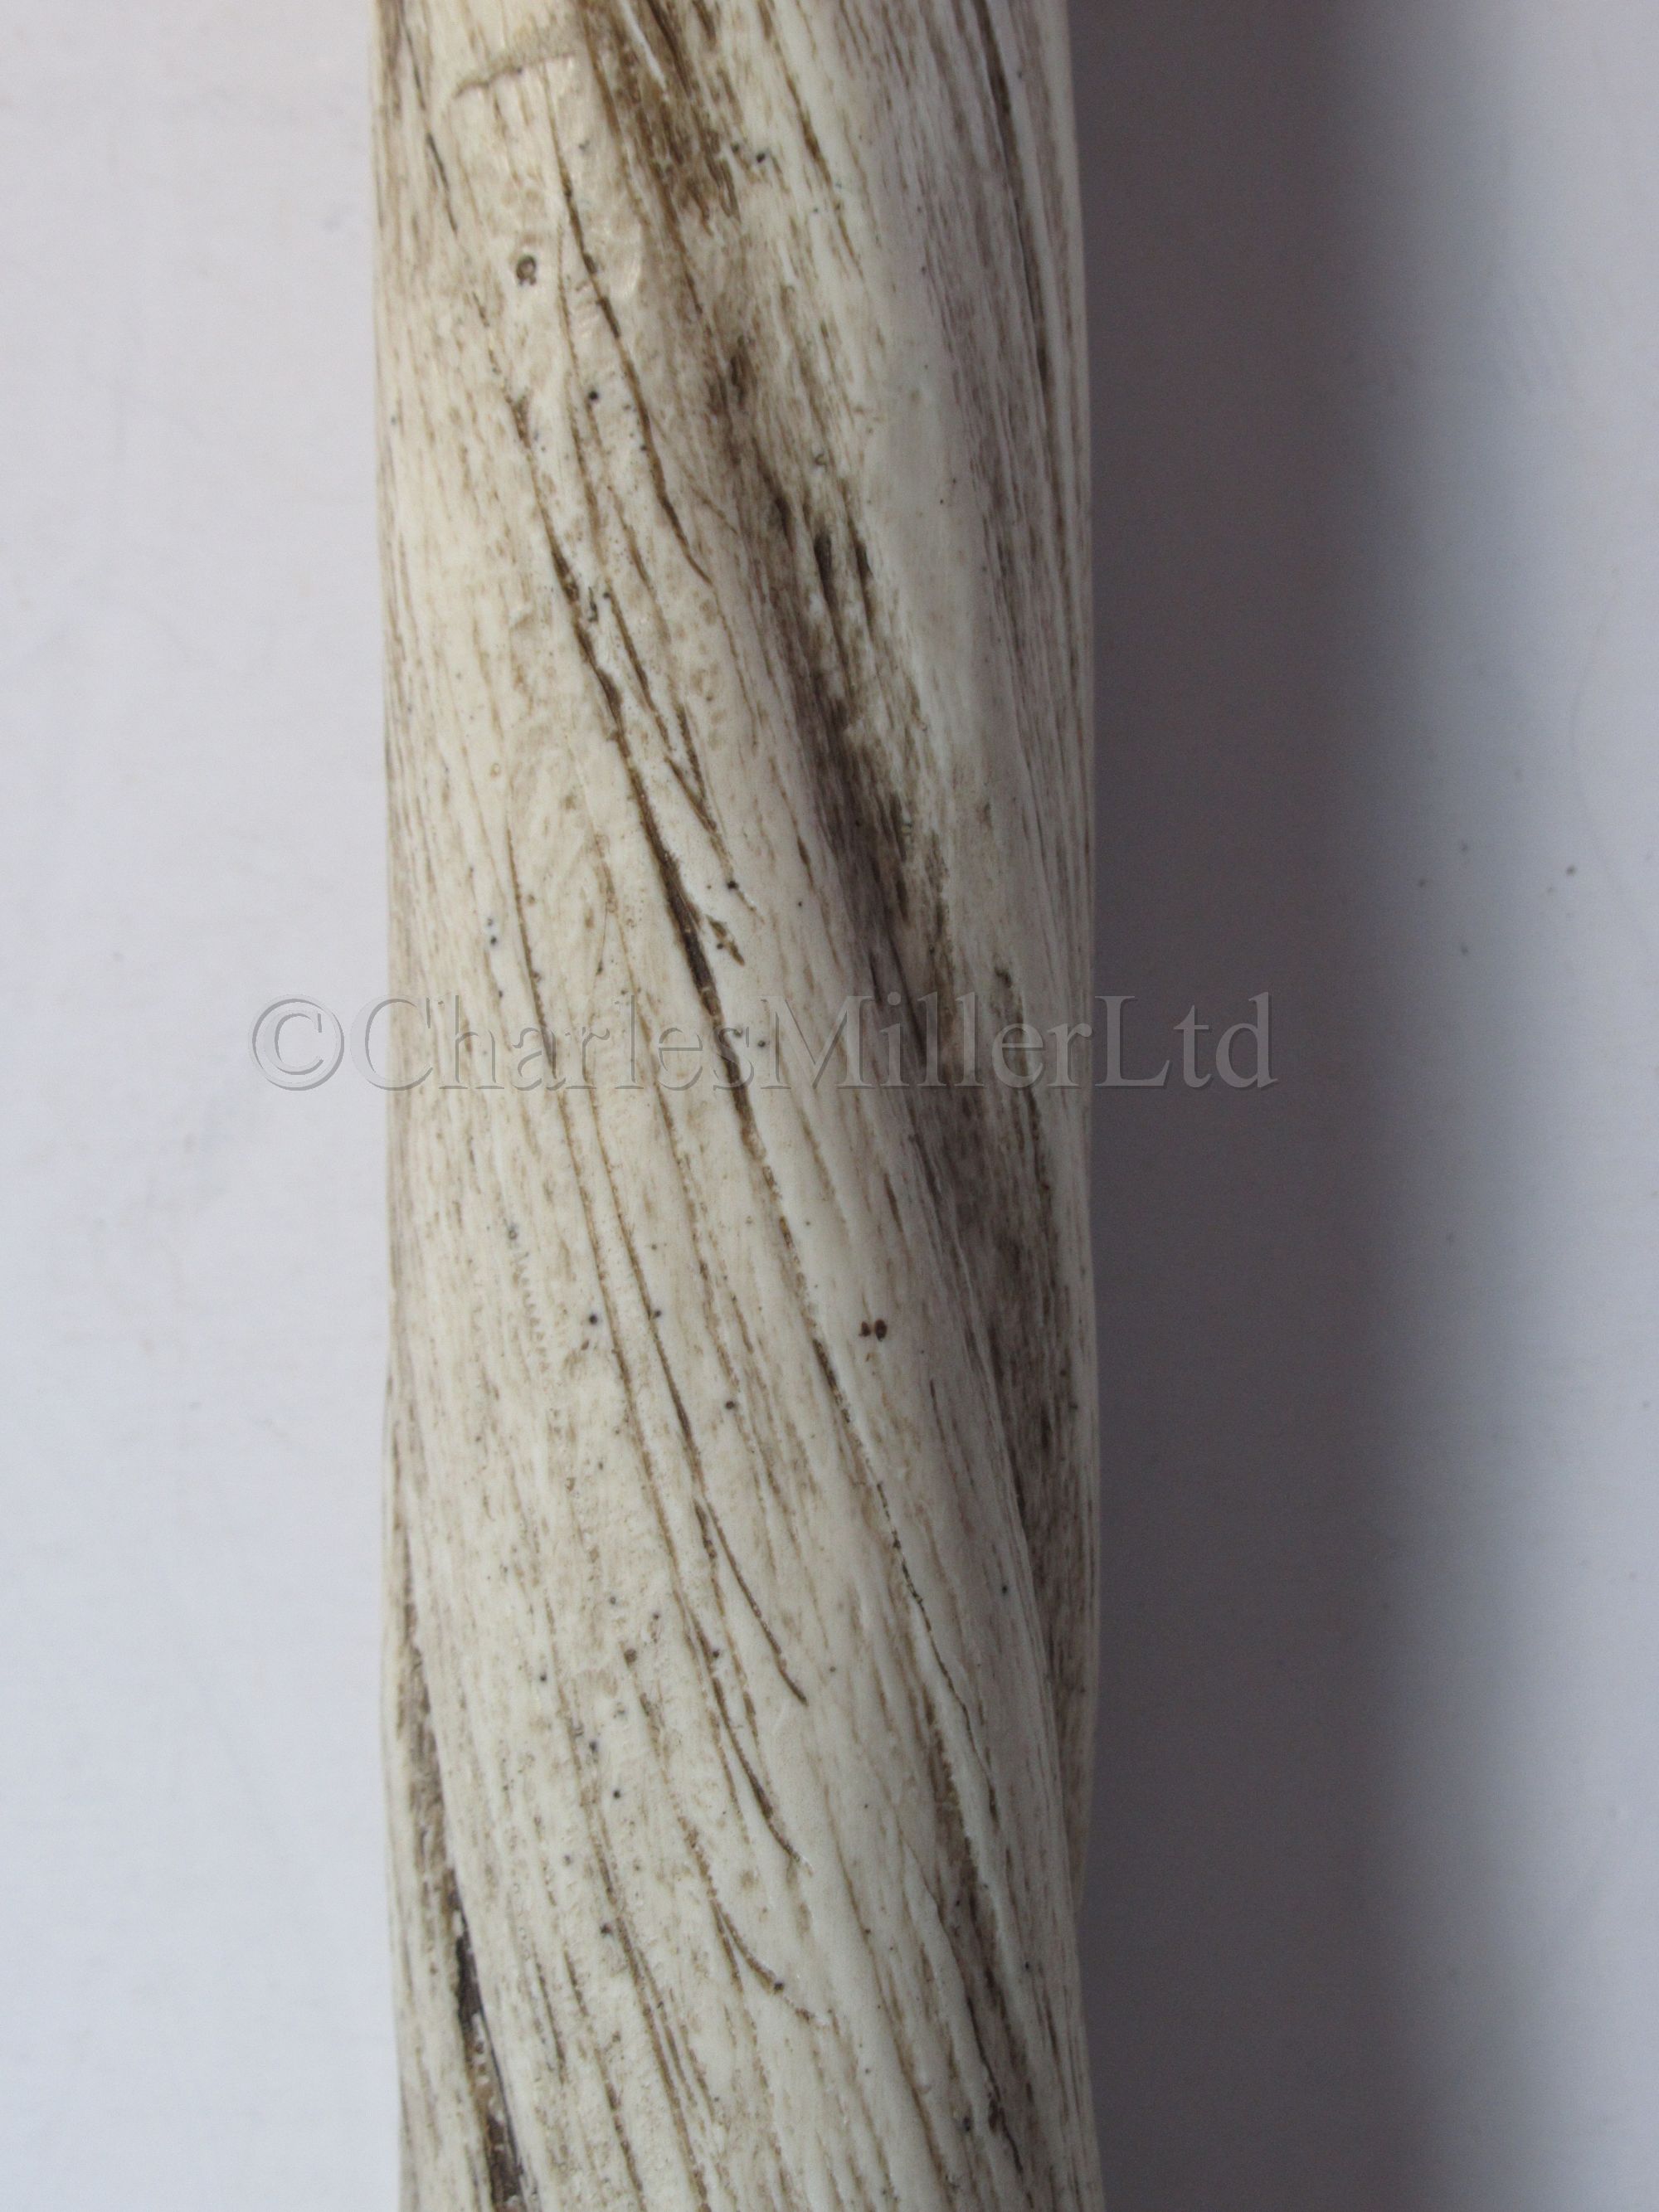 A FACSIMILE NARWHAL TUSK, MODERN - Image 2 of 3